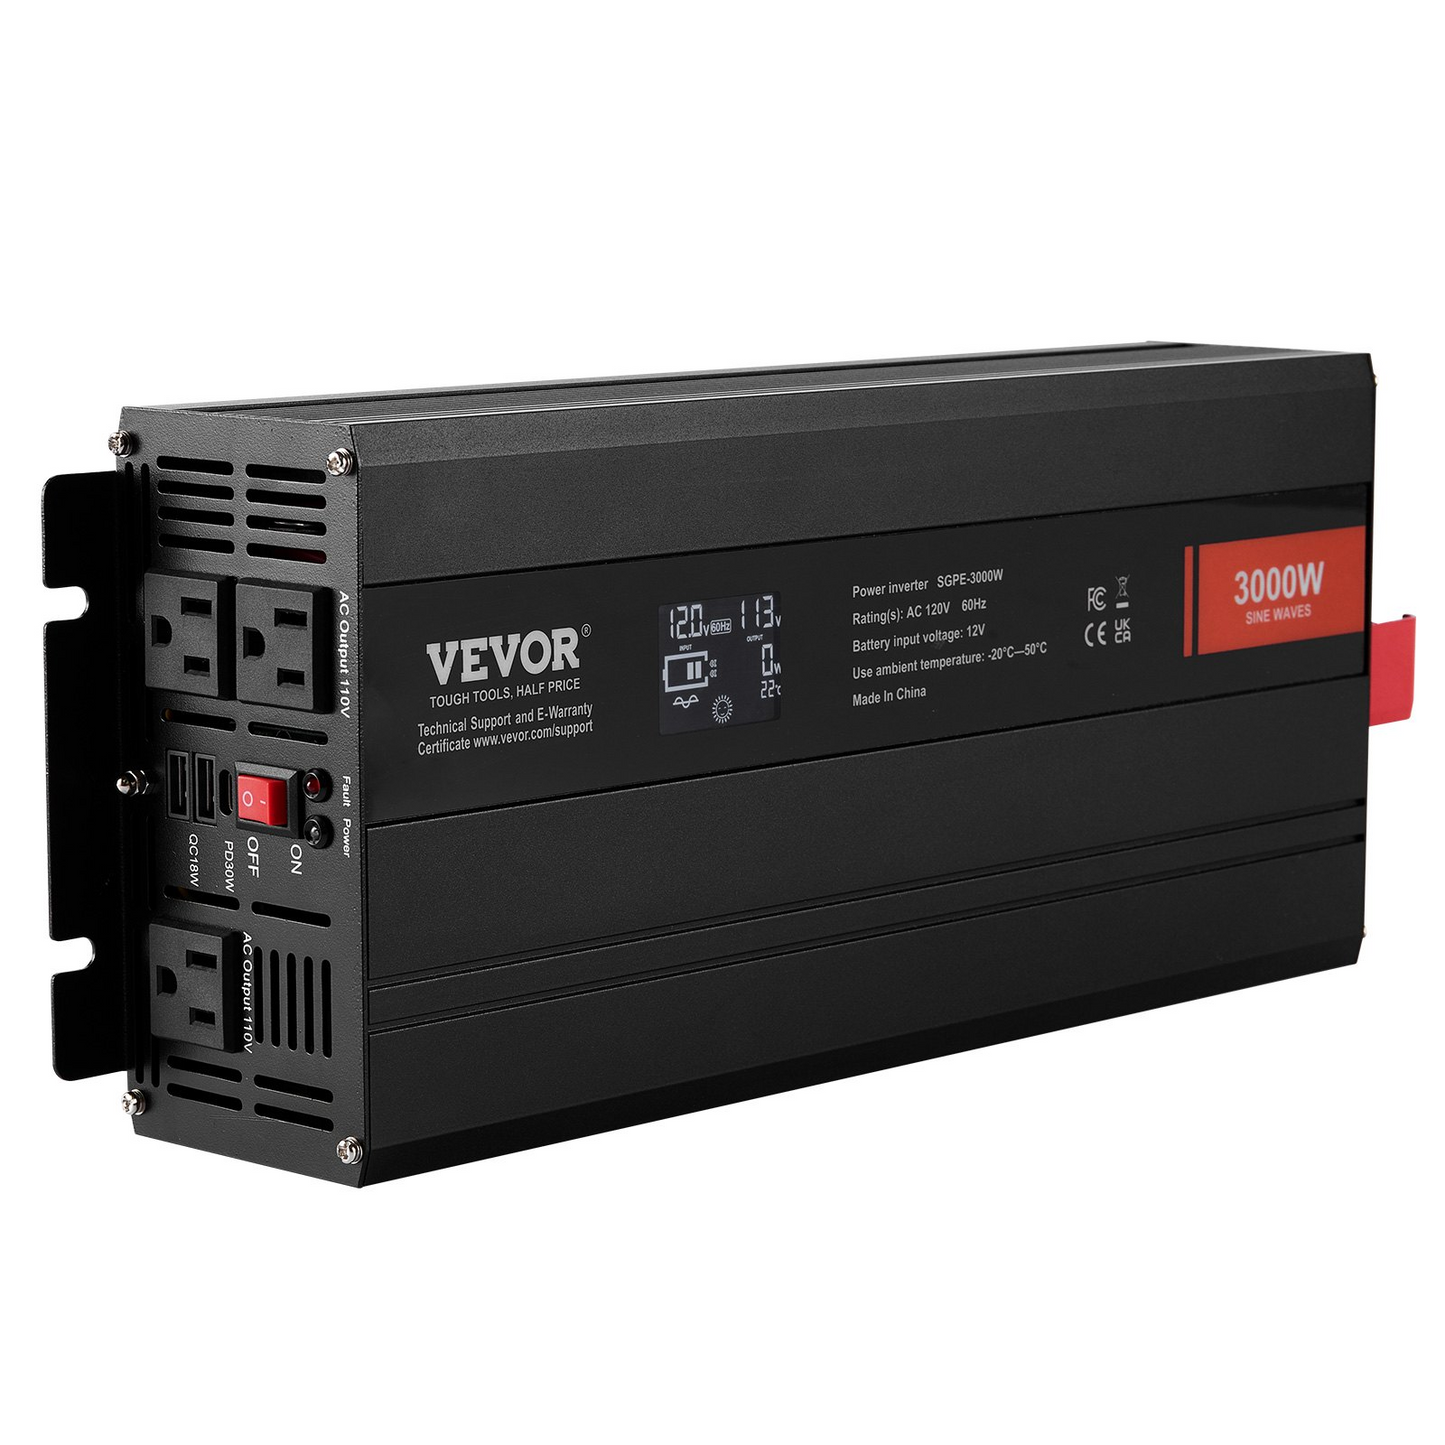 VEVOR Pure Sine Wave Inverter, 3000 Watt, DC 12V to AC 120V Power Inverter with 2 AC Outlets 2 USB Port 1 Type-C Port, LCD Display and Remote Controller for Large Home Appliances, CE FCC Certified, Goodies N Stuff